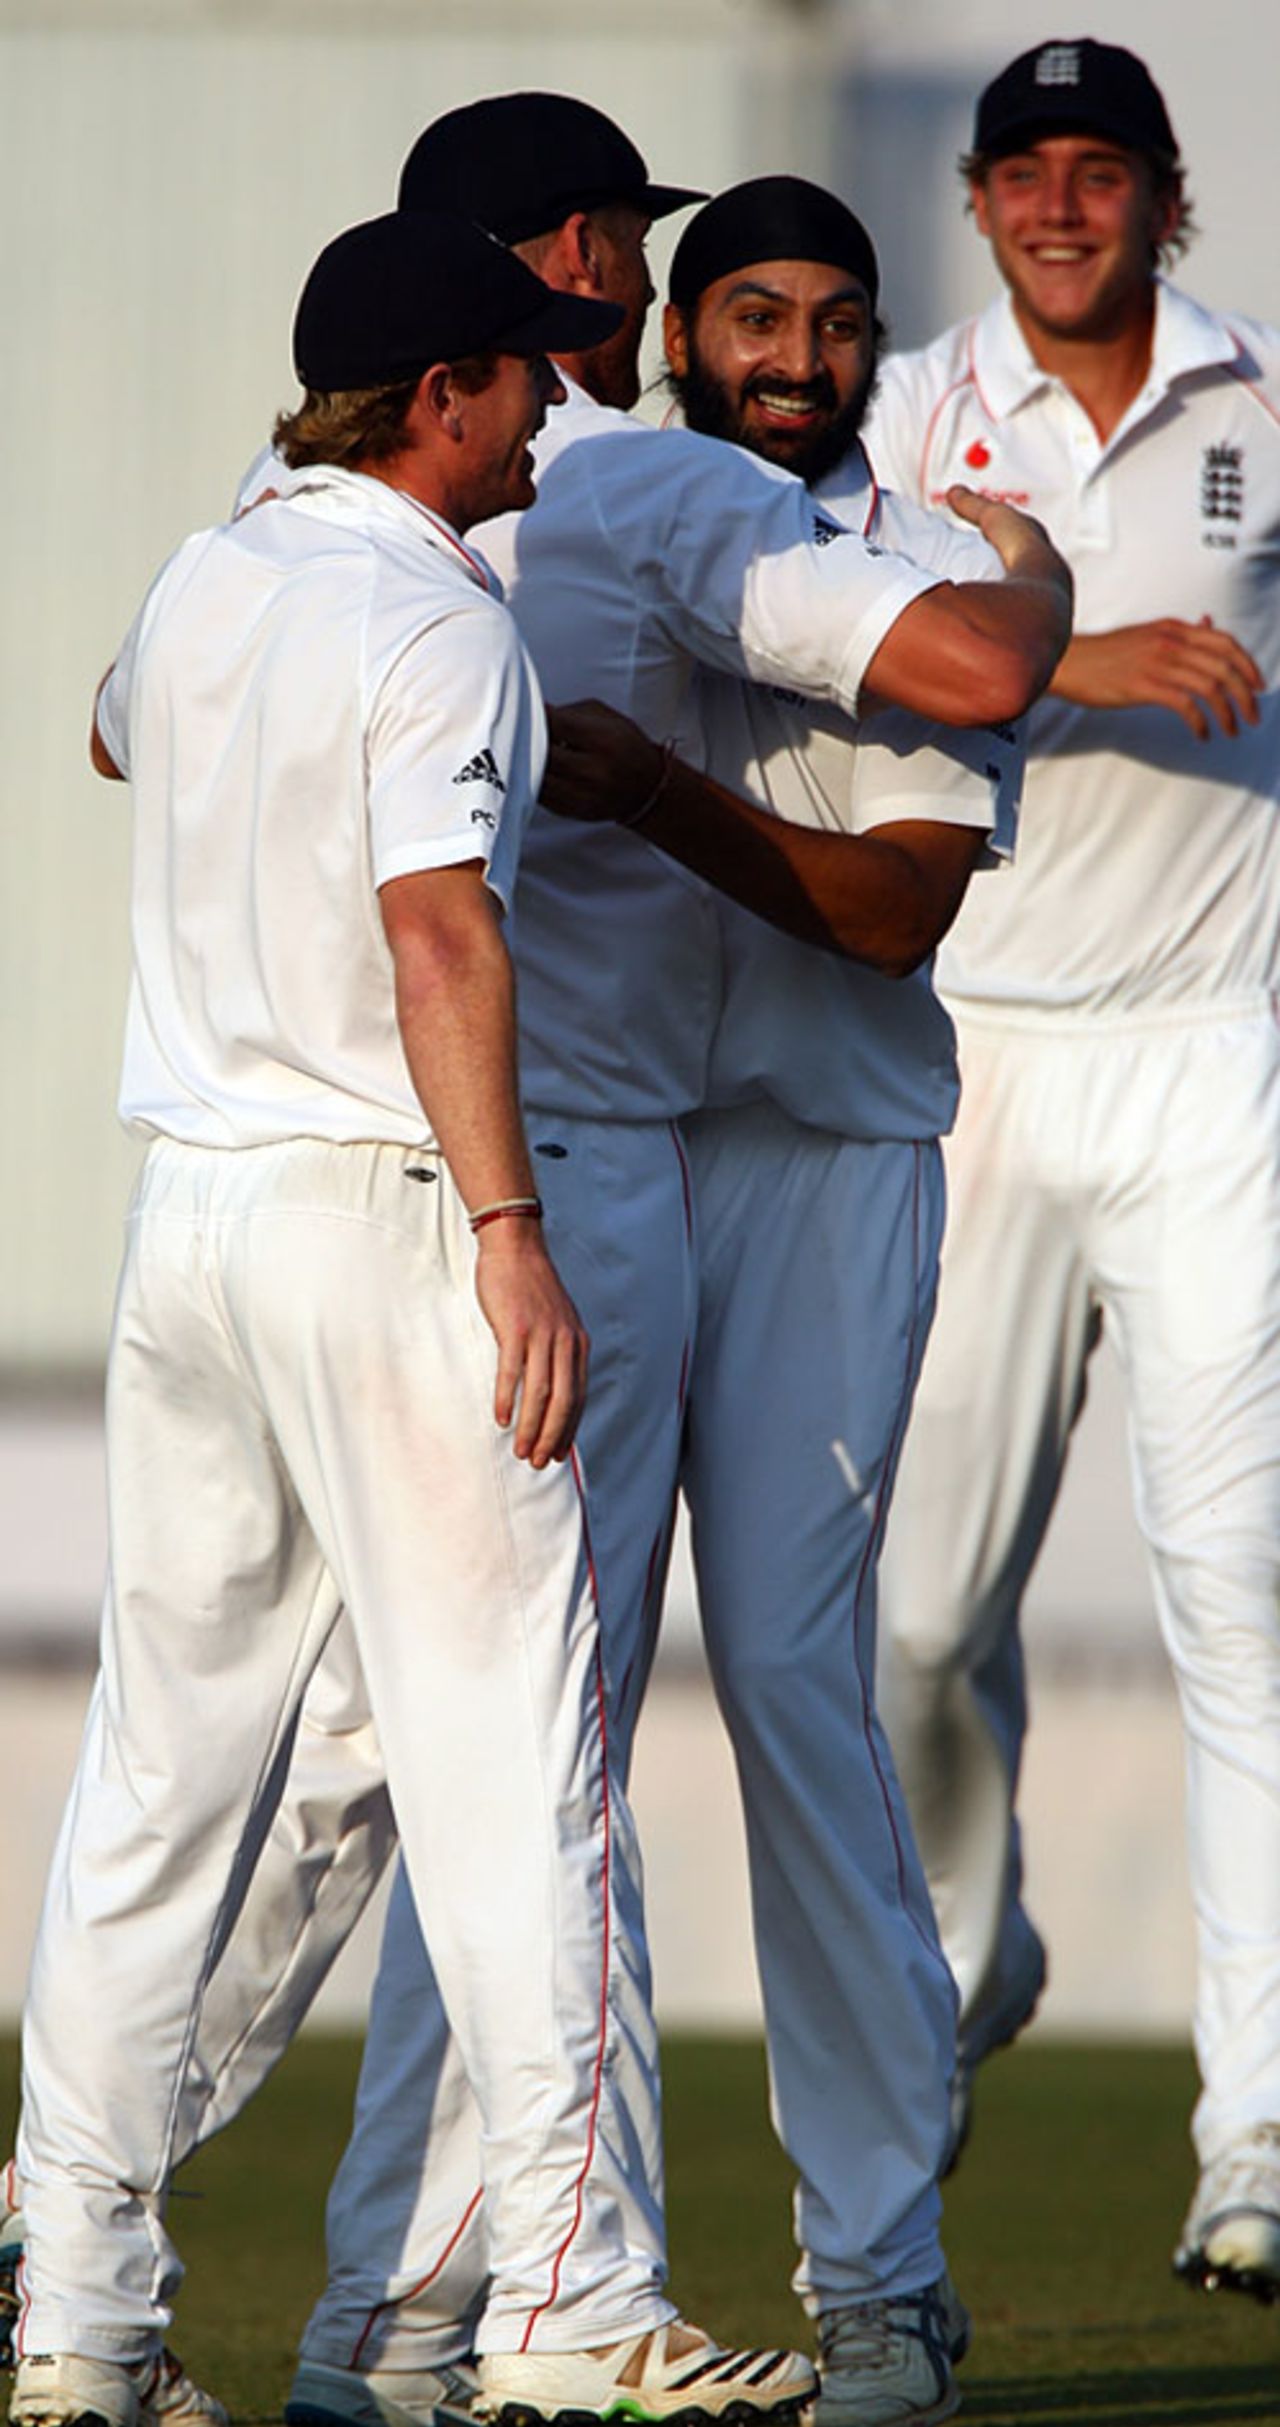 England players celebrate VVS Laxman's run-out, India v England, 2nd Test, Mohali, 4th day, December 22, 2008